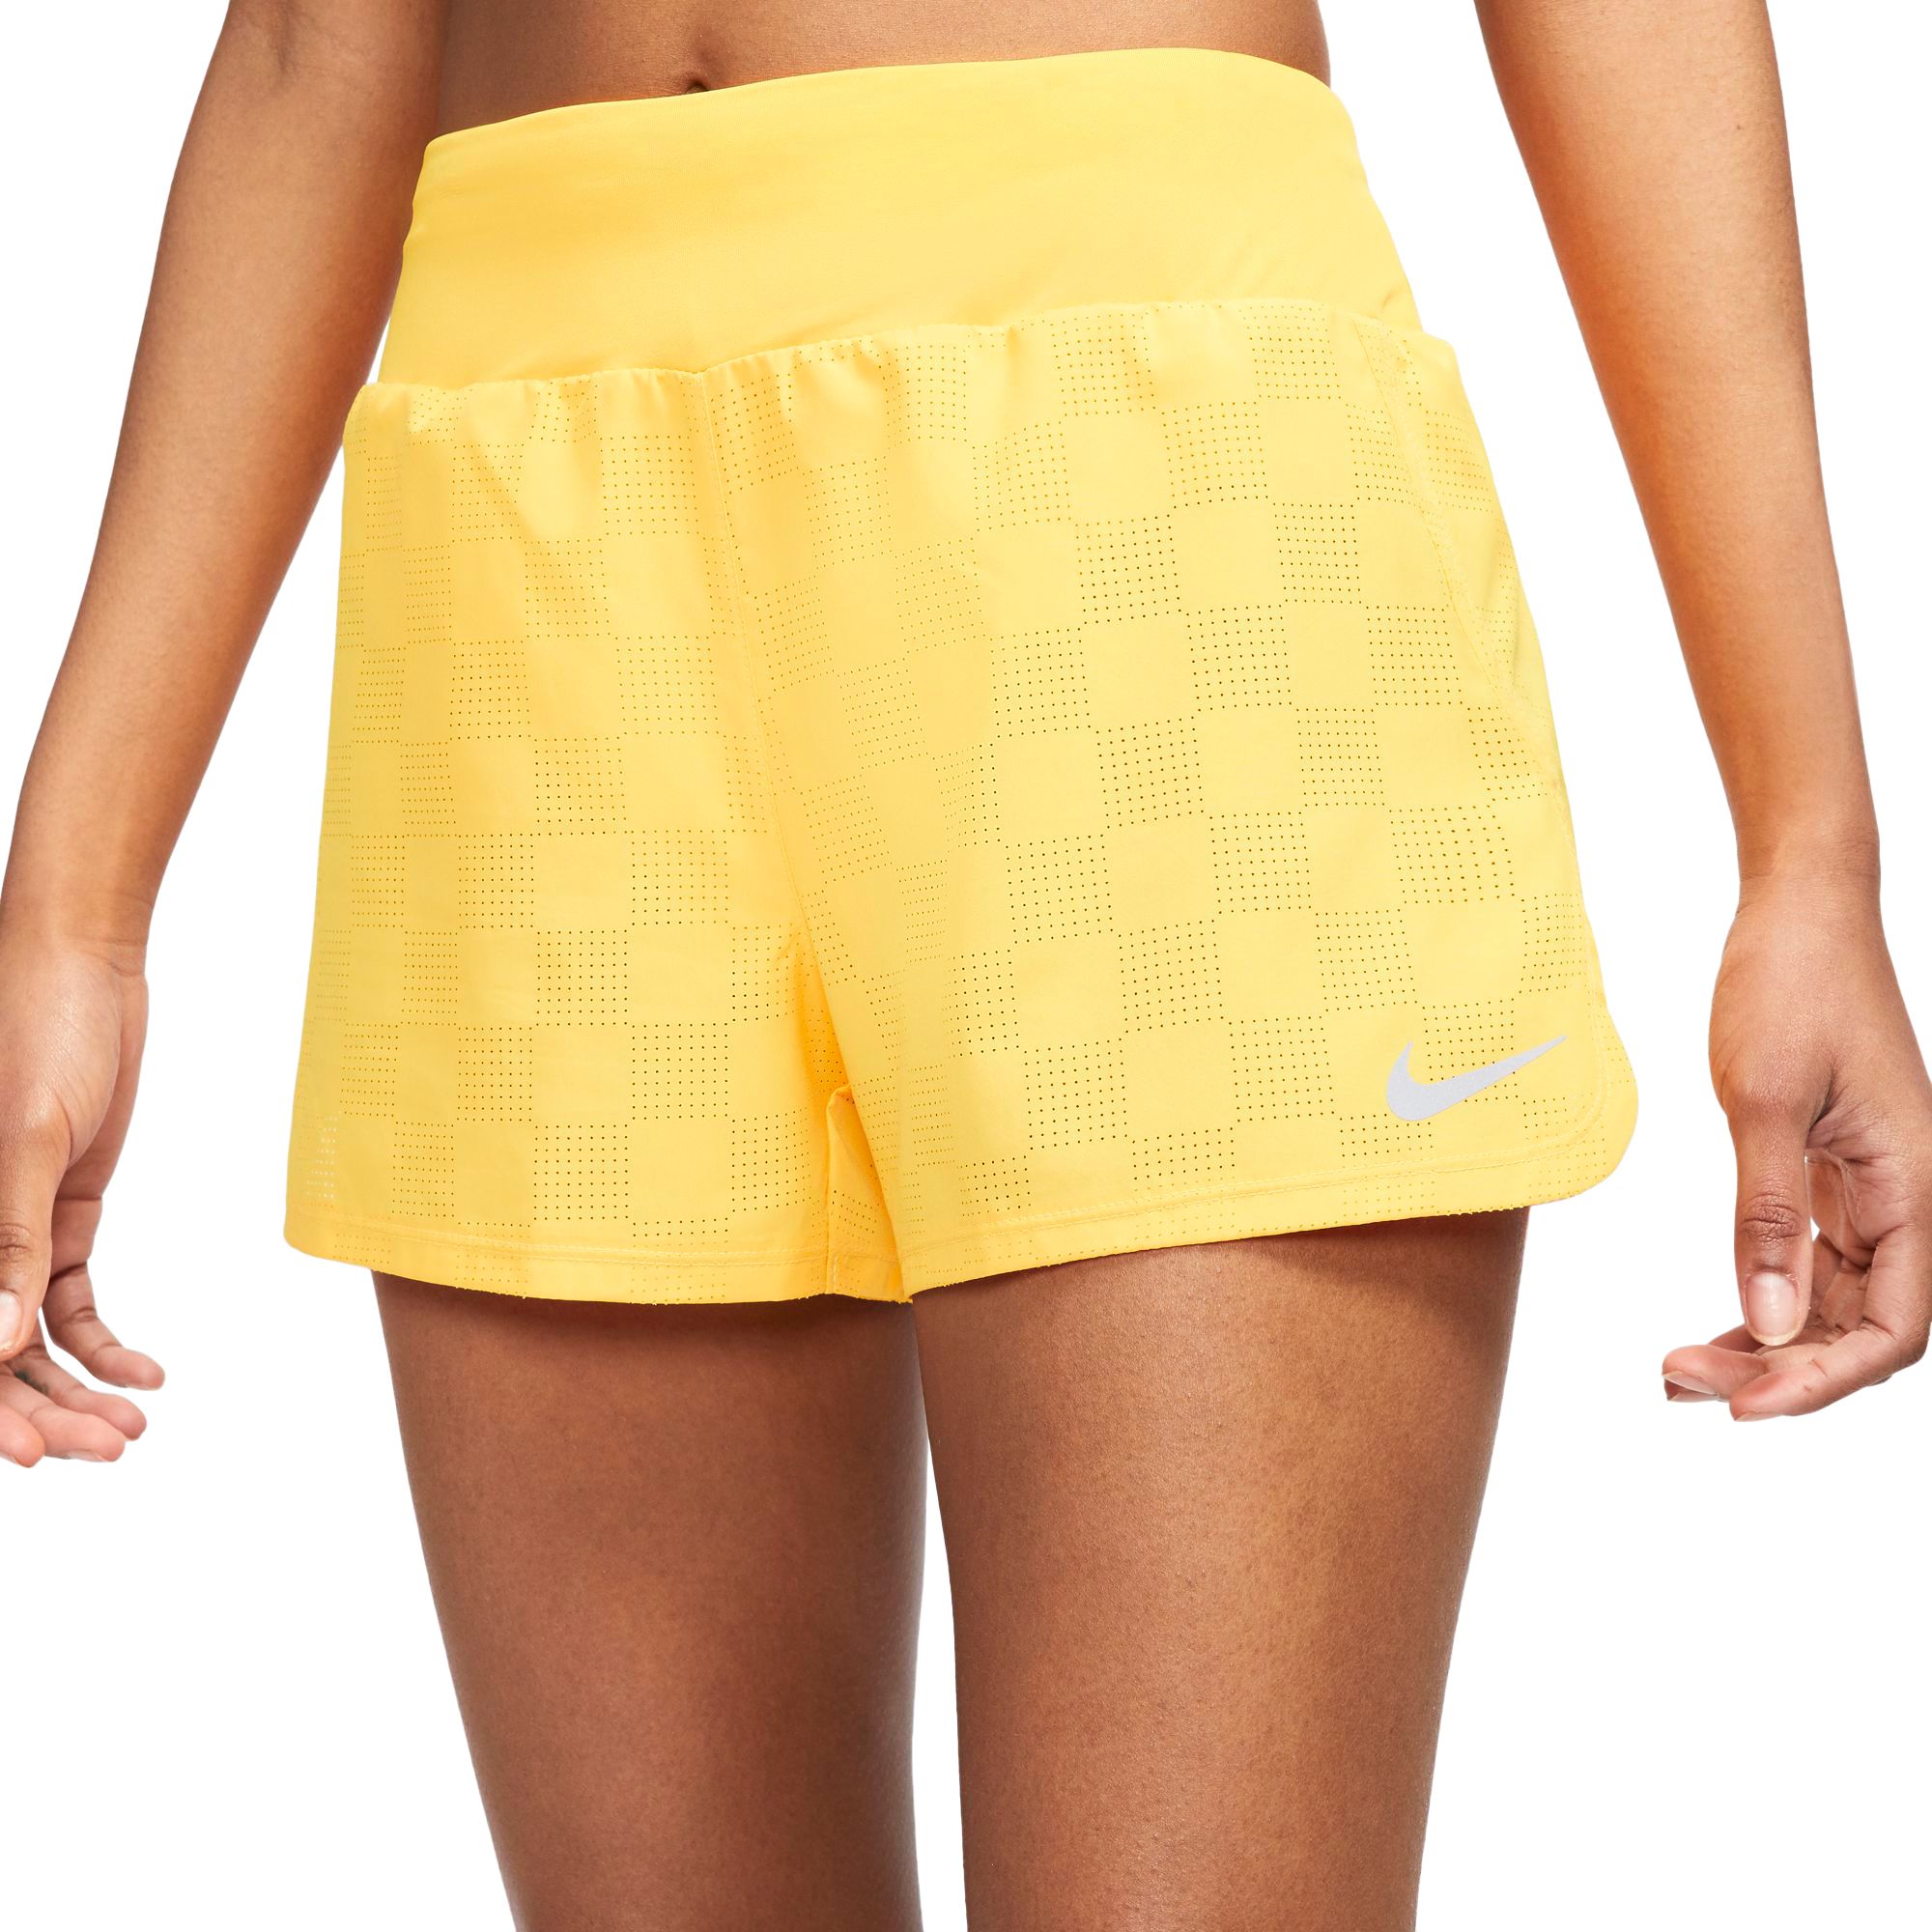 nike running shorts with pockets